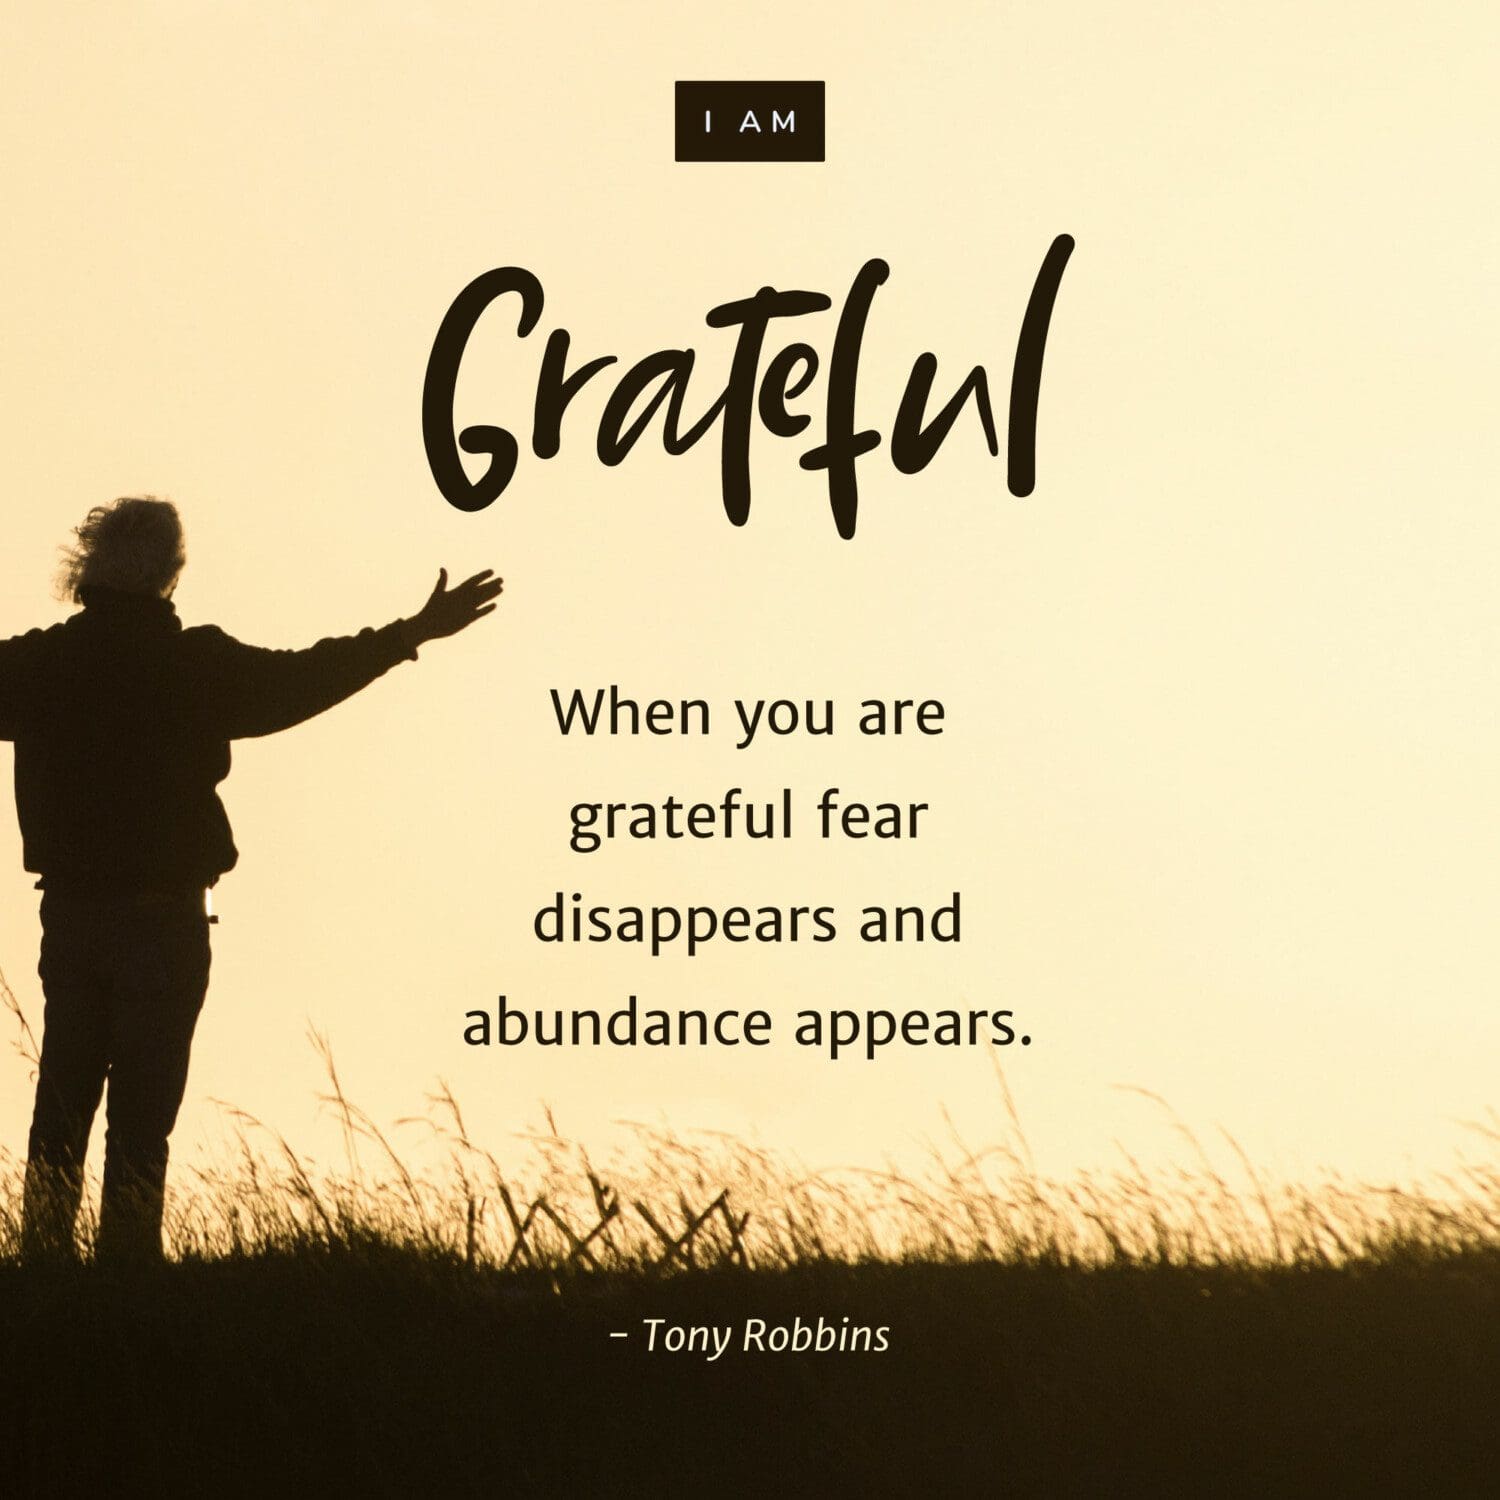 "When you are grateful fear disappears and abundance appears." – Tony Robbins